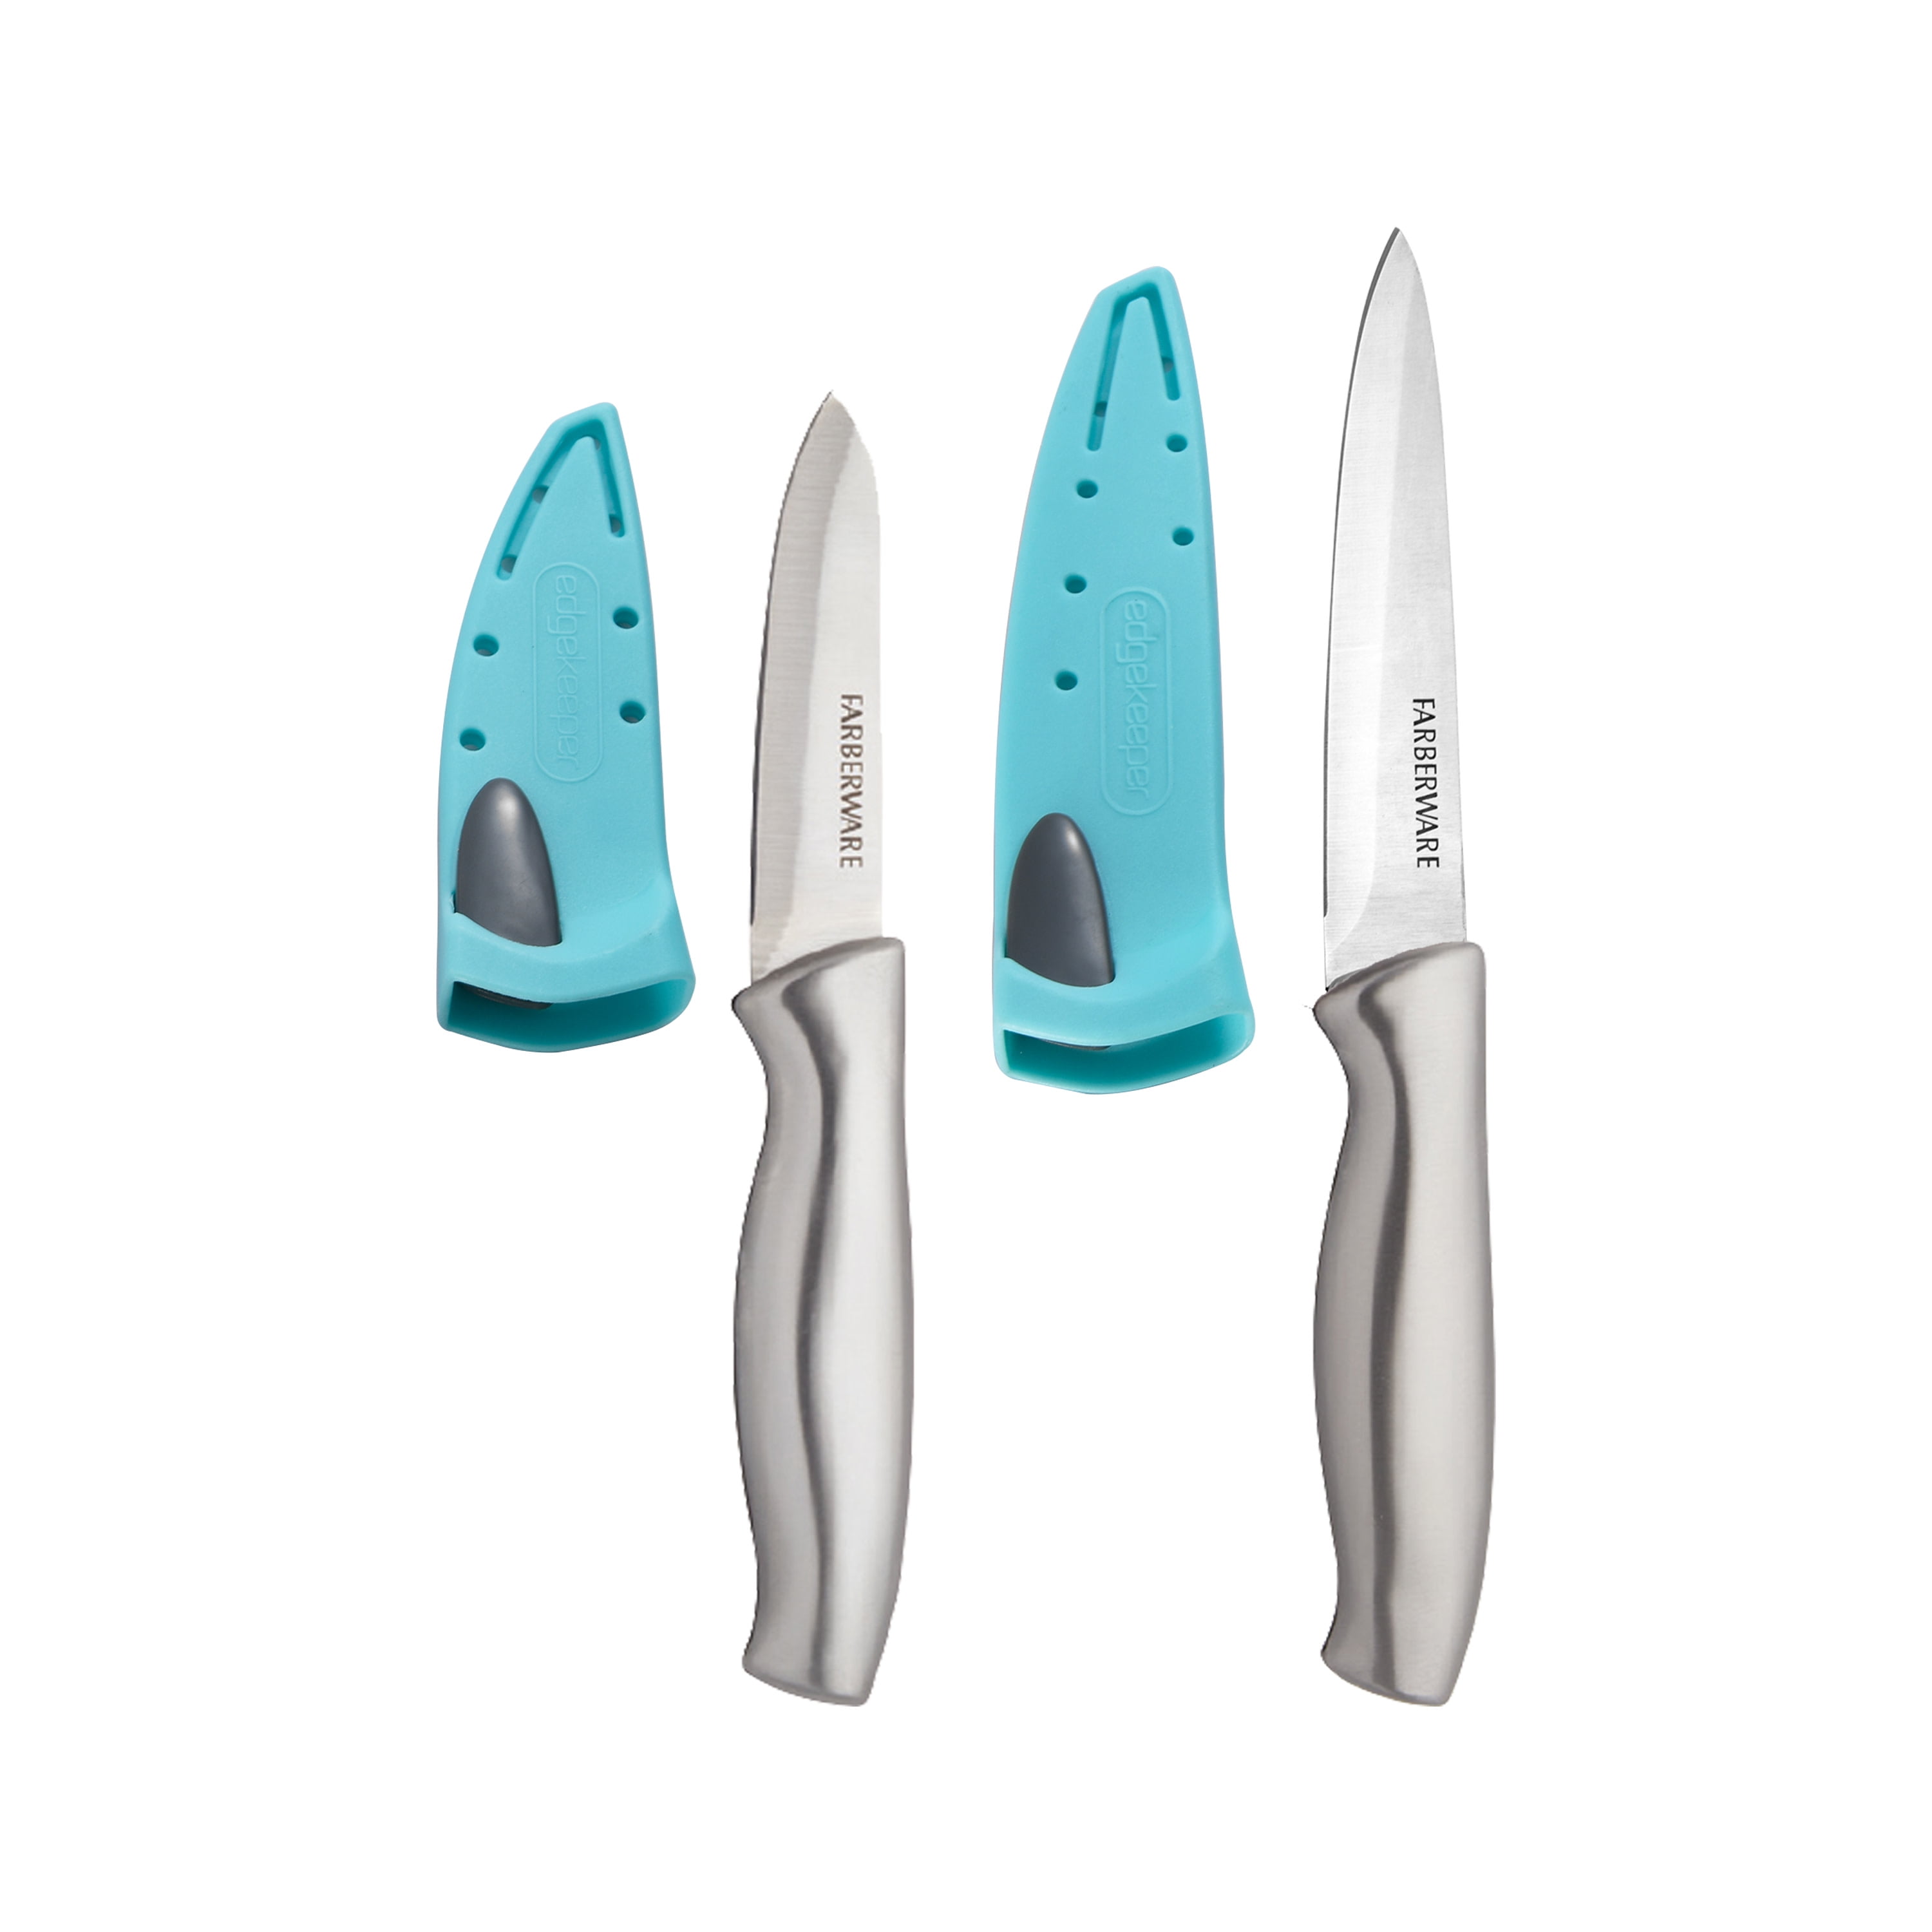 Farberware Stainless Steel Chef Knife Set, 4-Piece, Blue